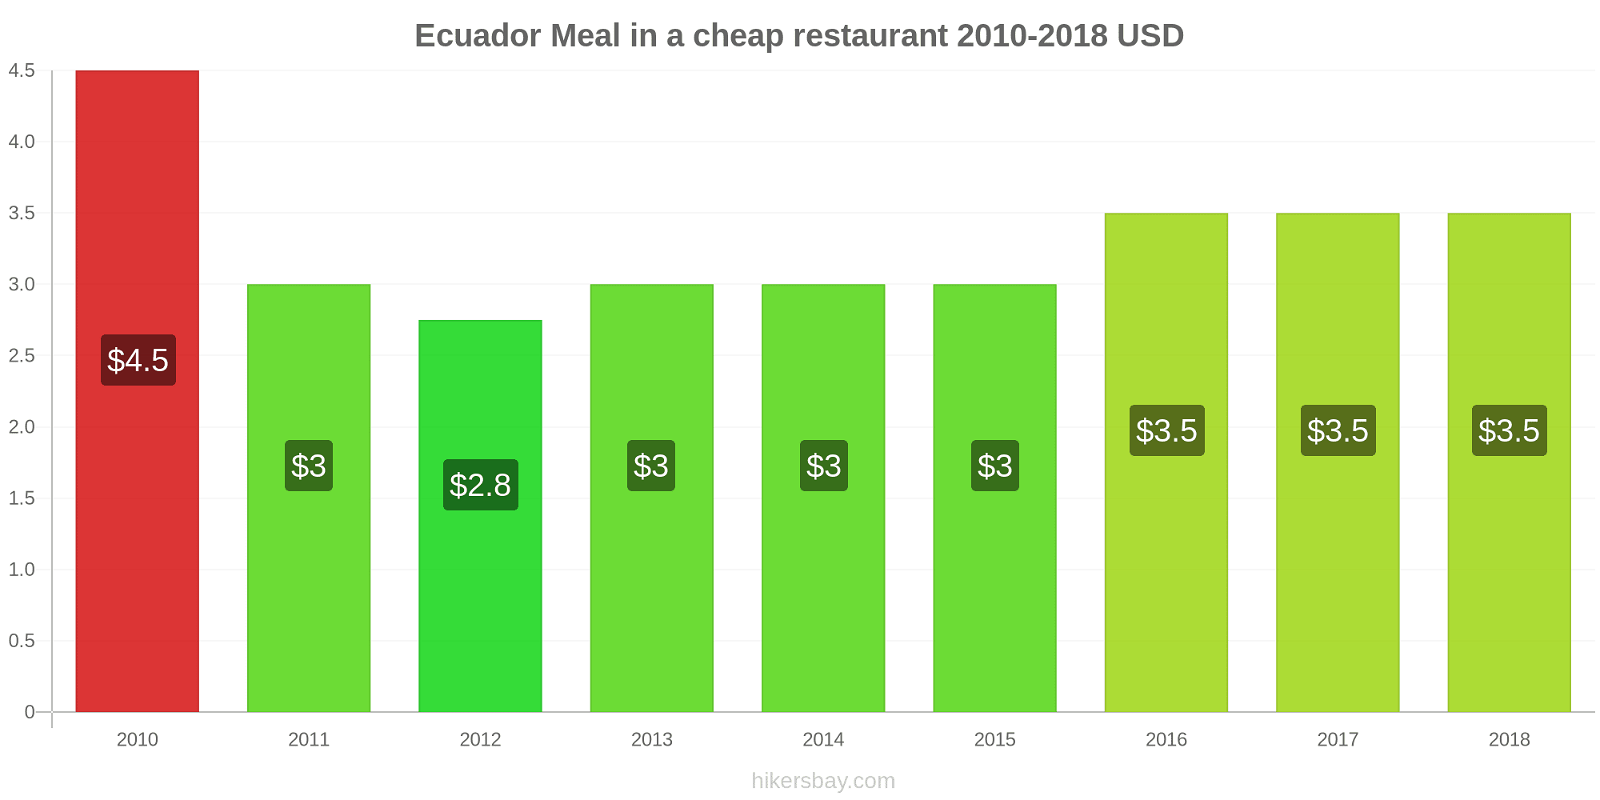 Ecuador price changes Meal in a cheap restaurant hikersbay.com